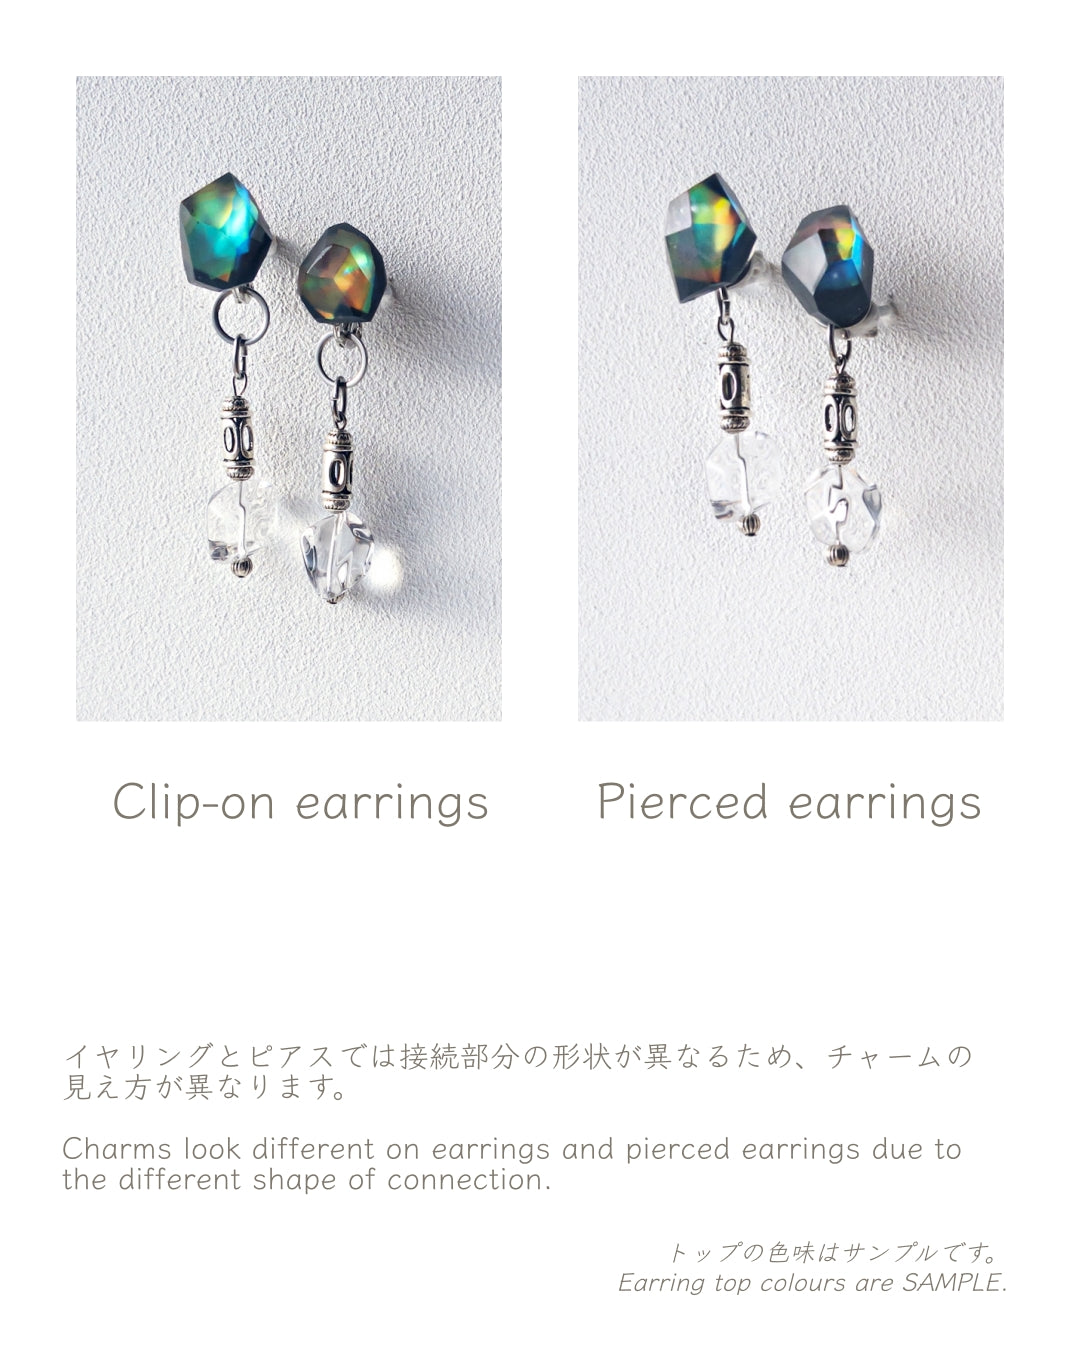 Frames earrings/crystals/Floating prism 1-a